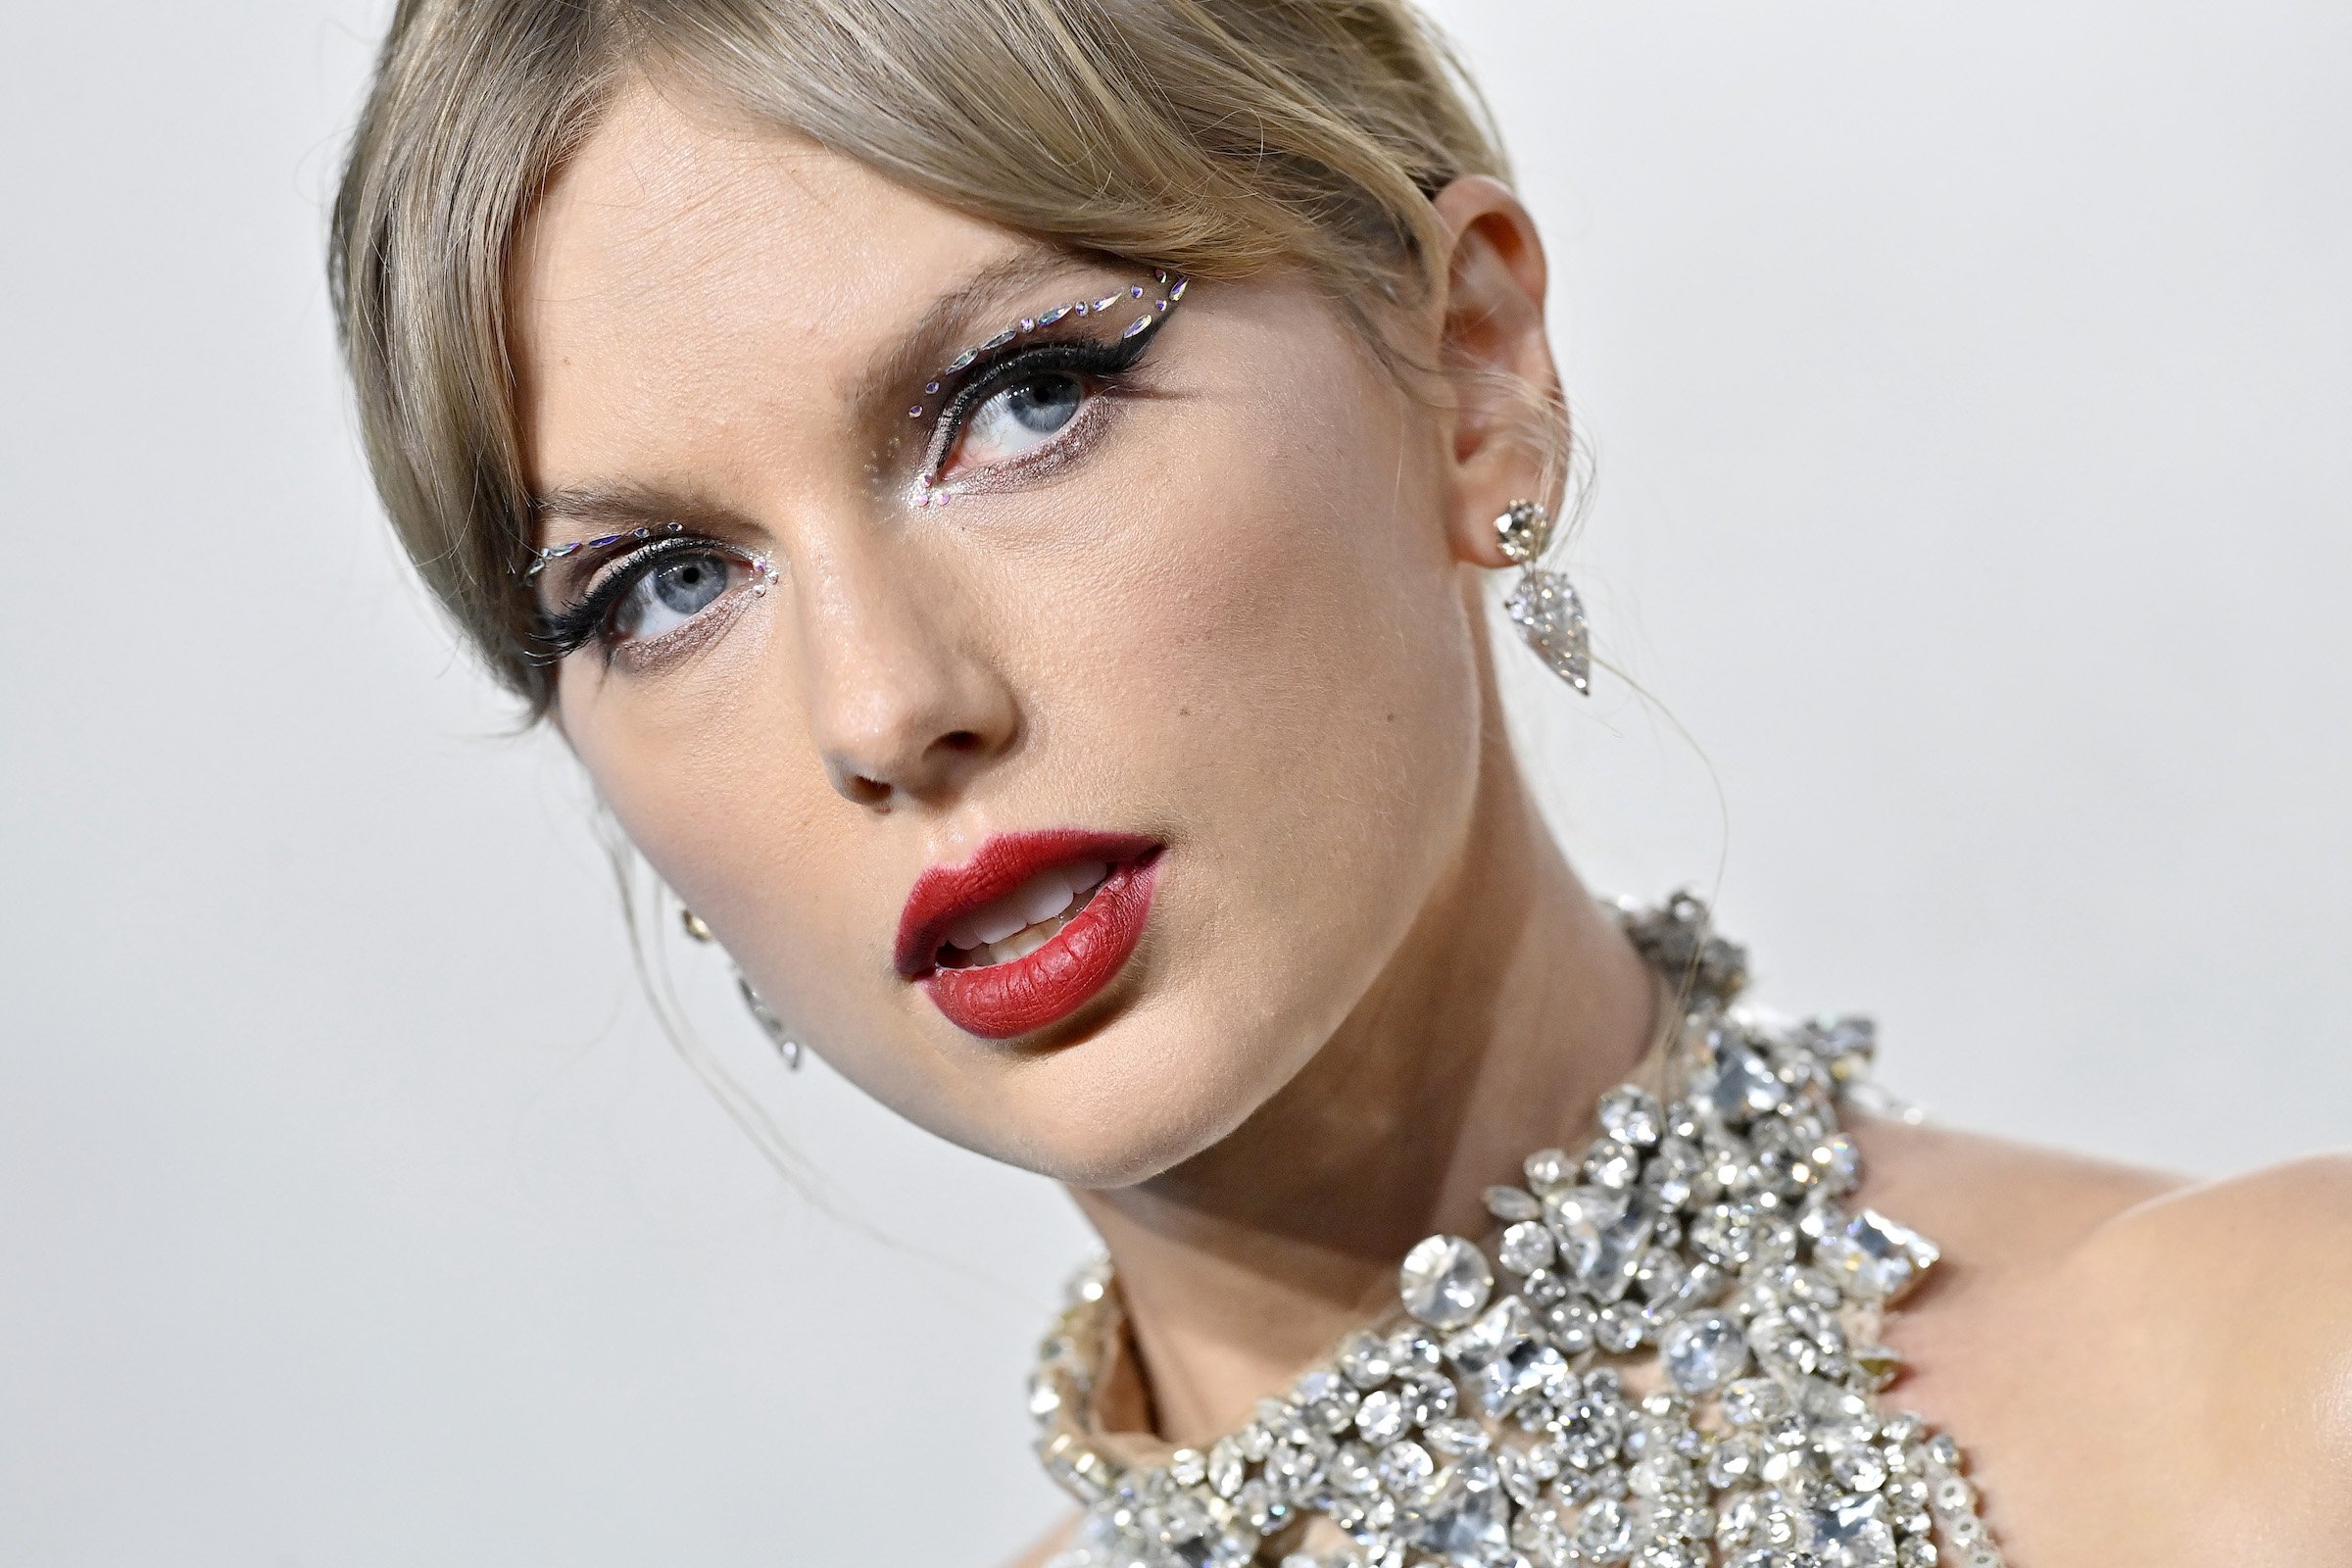 Taylor Swift, whose 'All Too Well' short film won at the VMAs, wearing red lipstick and a crystal outfit